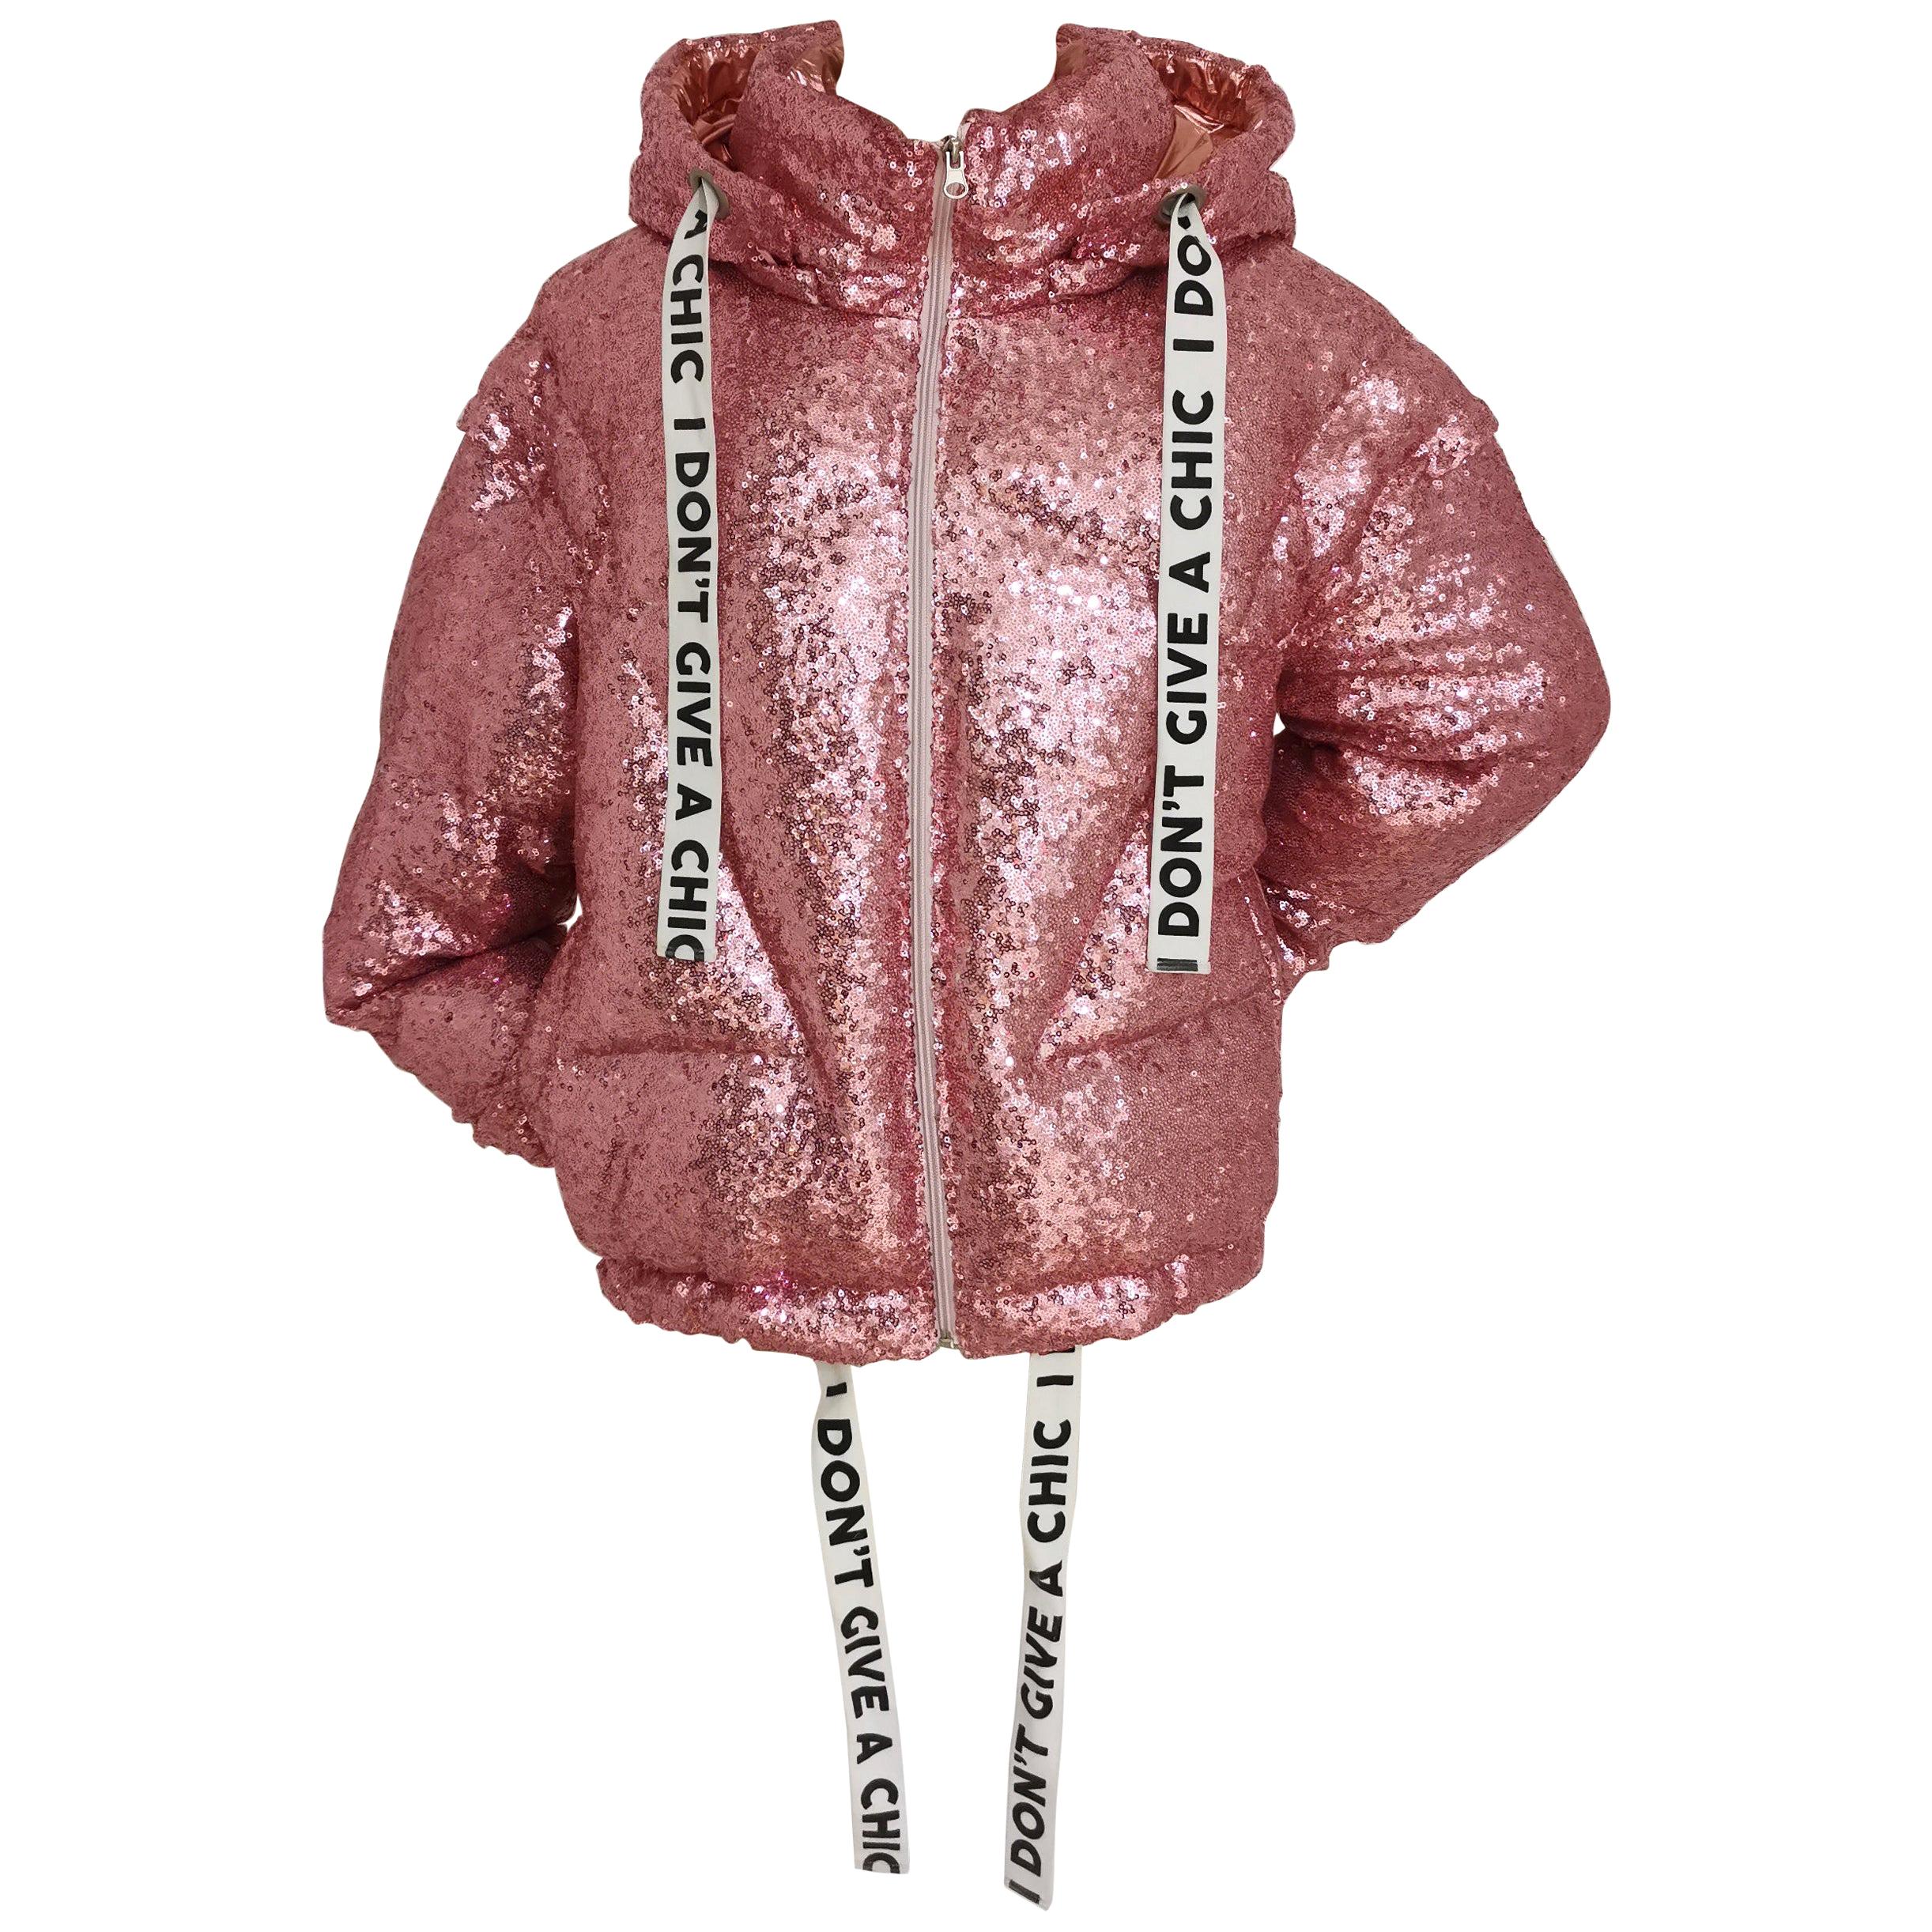 House of Mua Mua pink sequins "It's not you it's me" bomber jacket